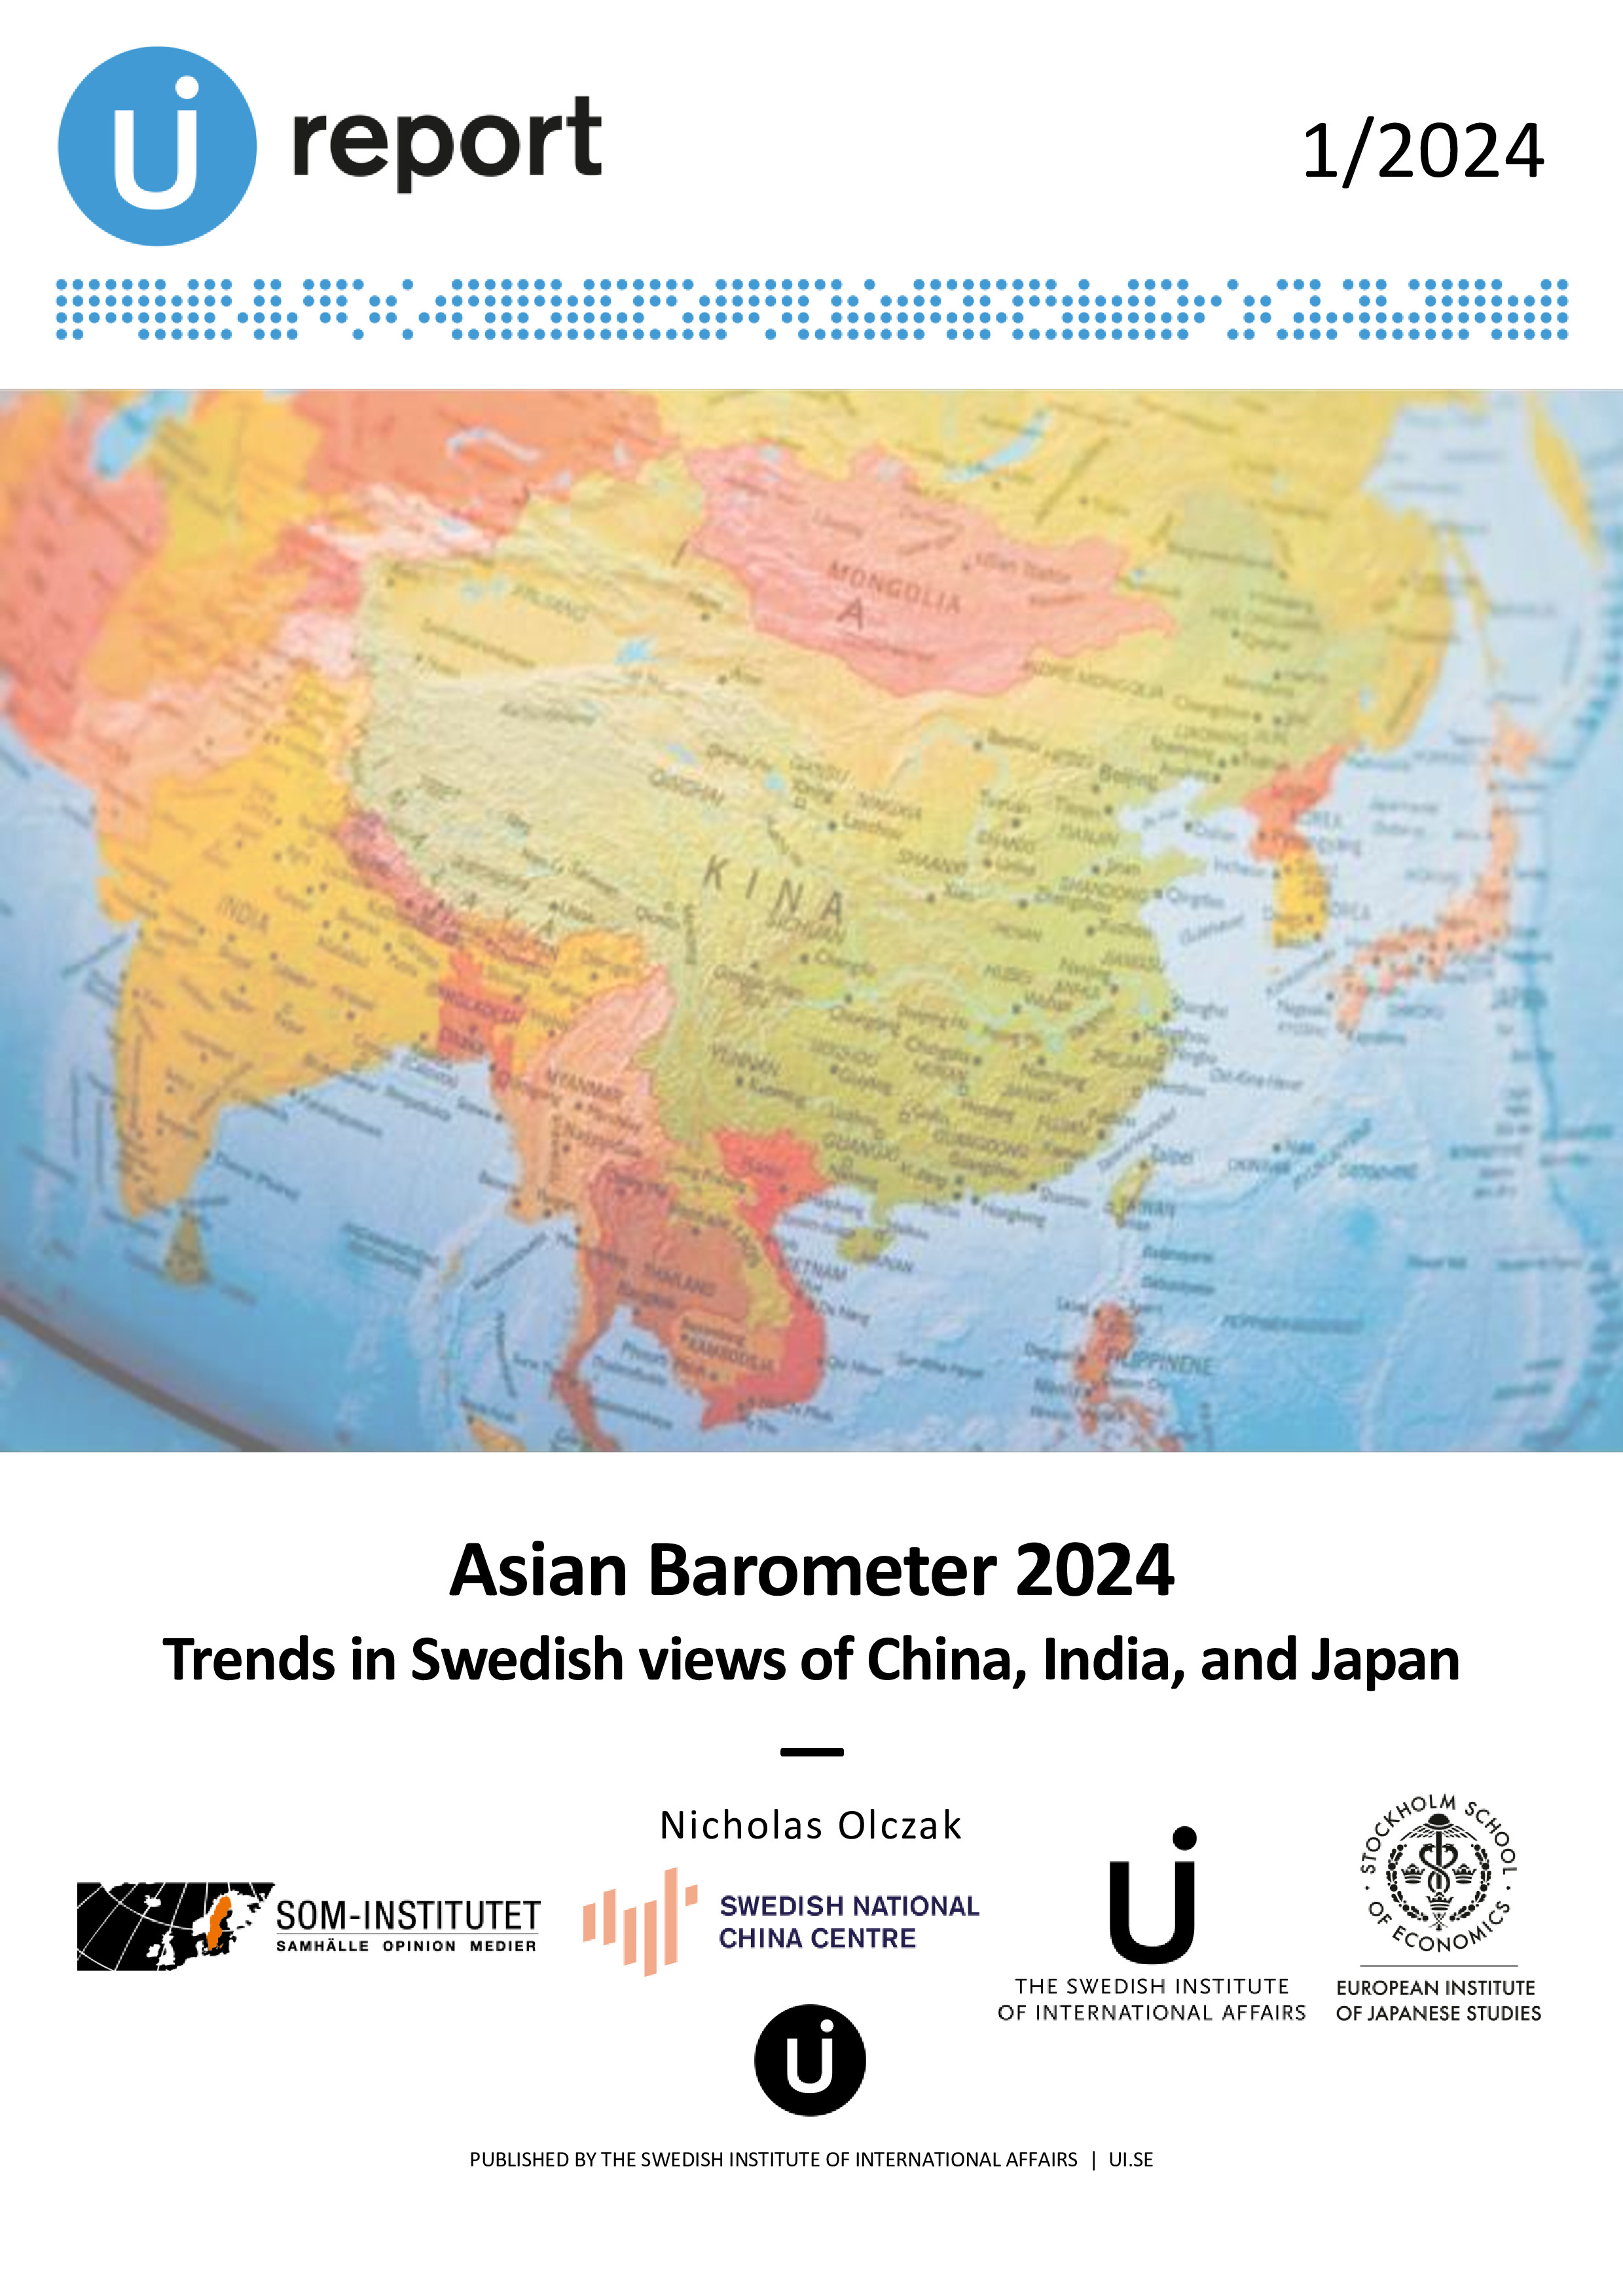 Asian Barometer 2024: Trends in Swedish Views of China, India, and Japan